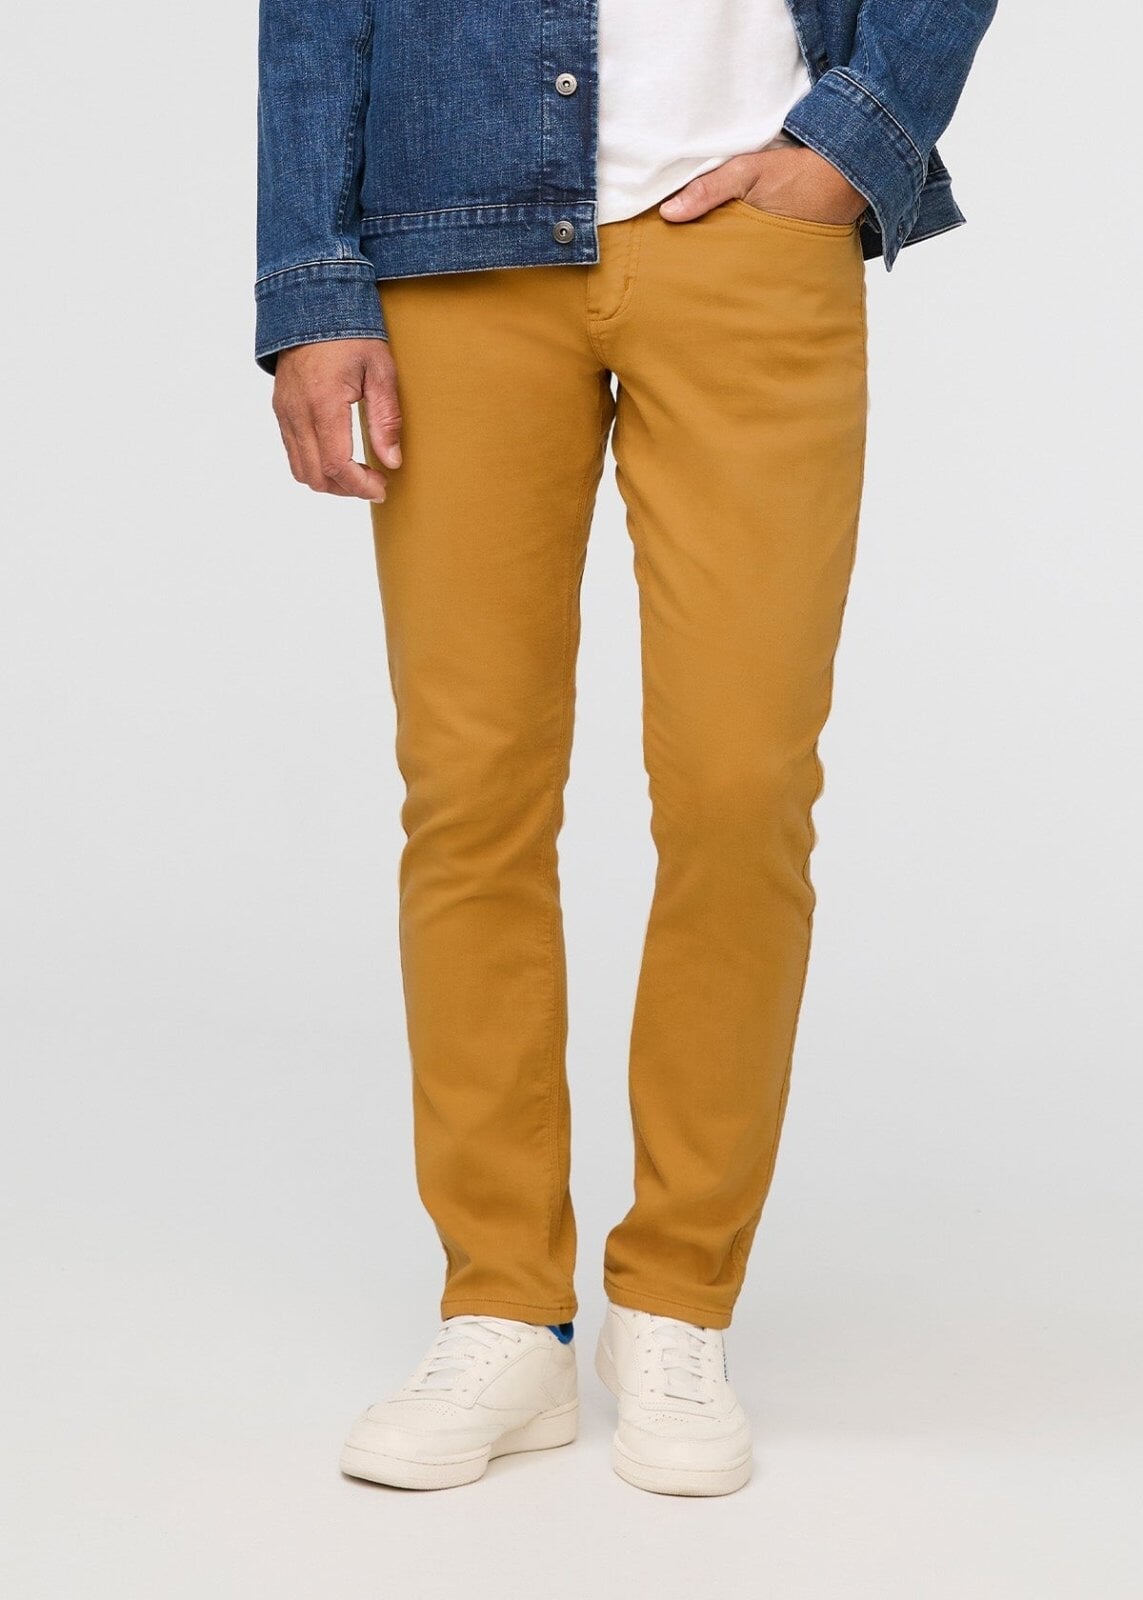 Navy Mustard | Mustard pants, Mens outfits, Best man's outfit